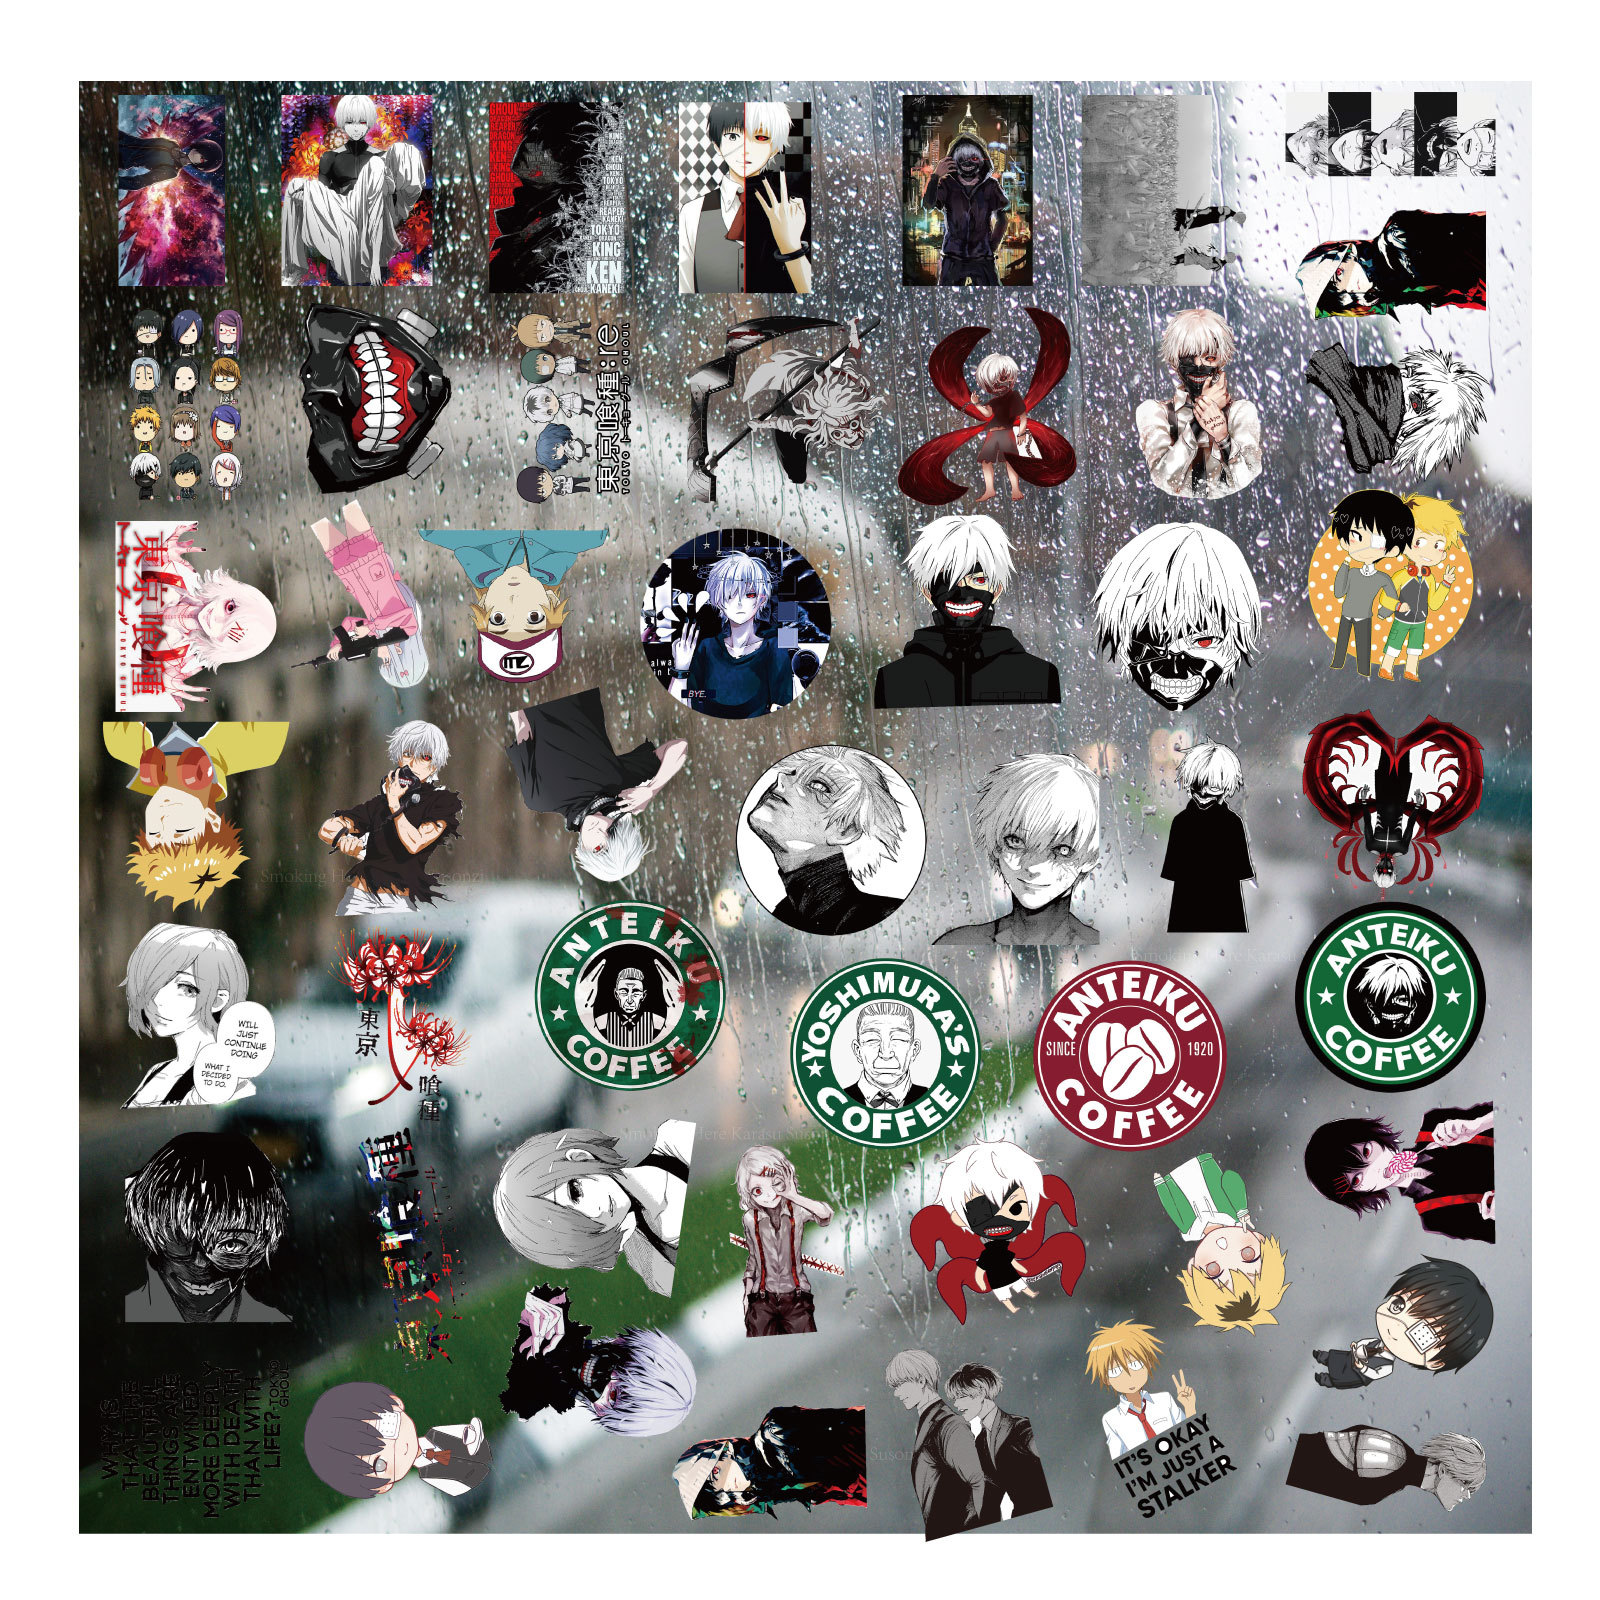 Tokyo Ghoul anime 3D sticker price for a set of 50-52pcs